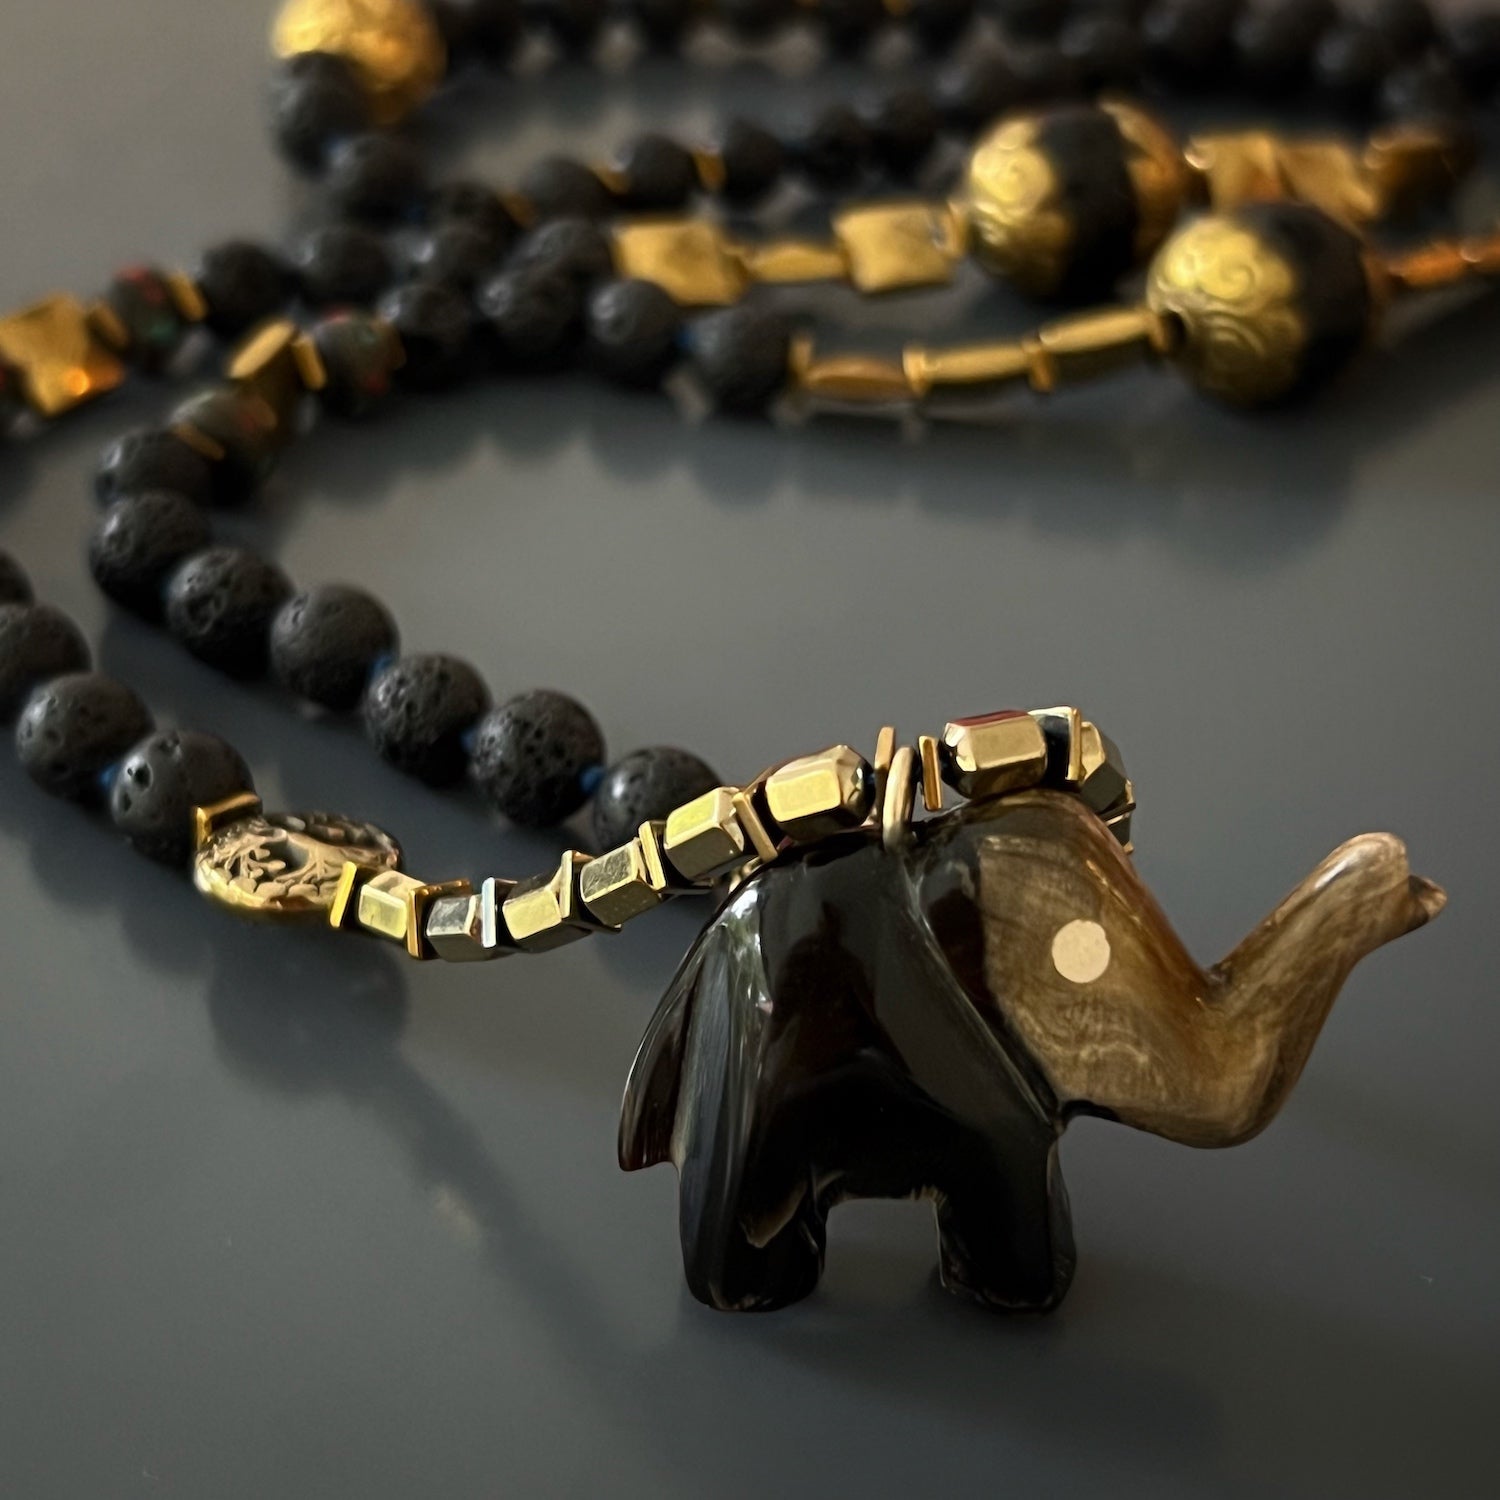 Adorn yourself with the Spiritual Nepal Elephant Necklace, crafted with attention to detail